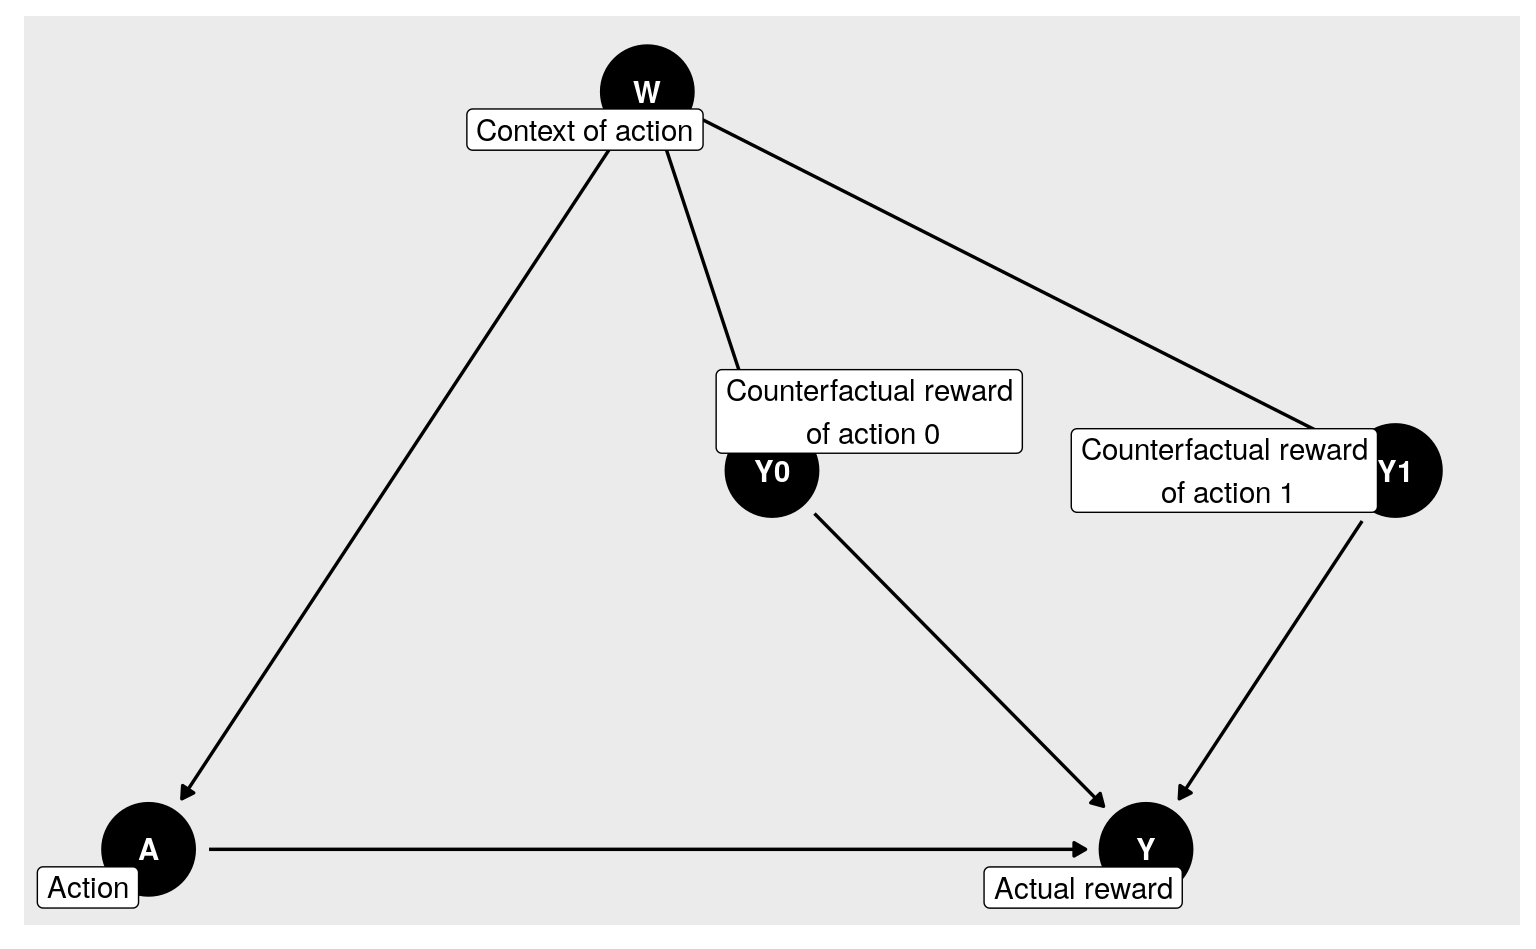 Directed acyclic graph summarizing the inner causal mechanism at play in experiment.